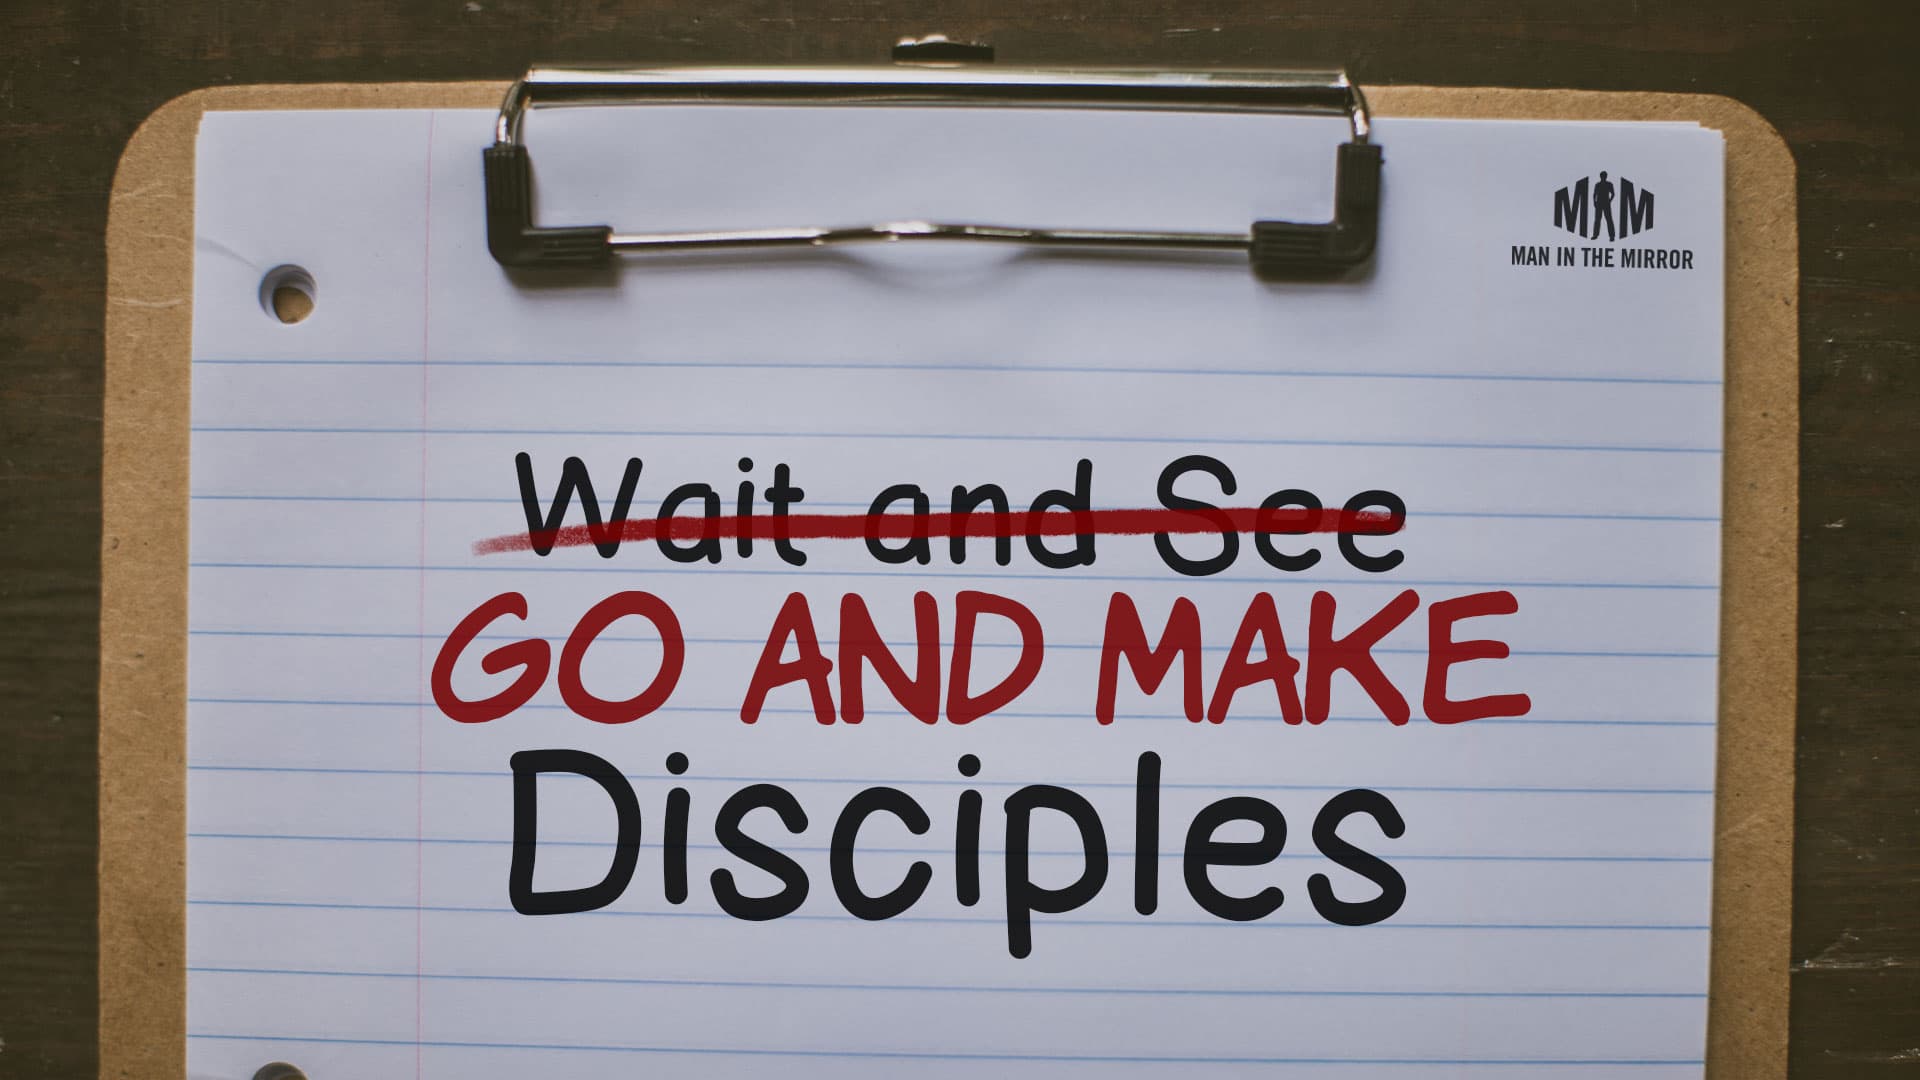 Go and make disciples